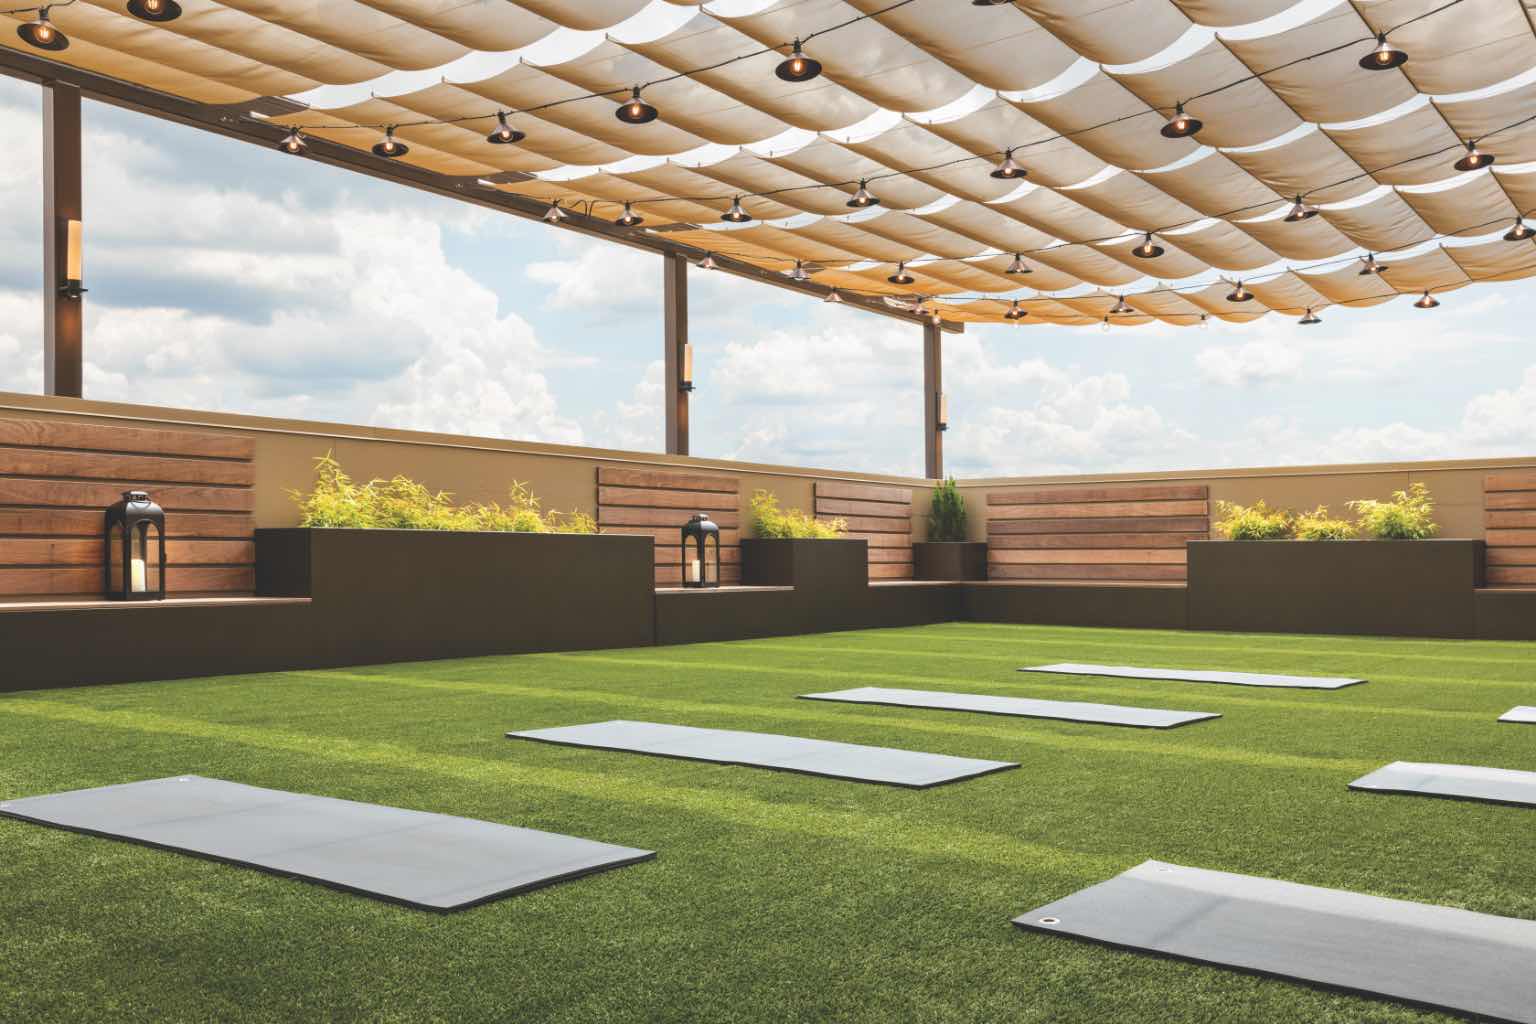 Image of outdoor patio area, with greenery and yoga mats laid out. 